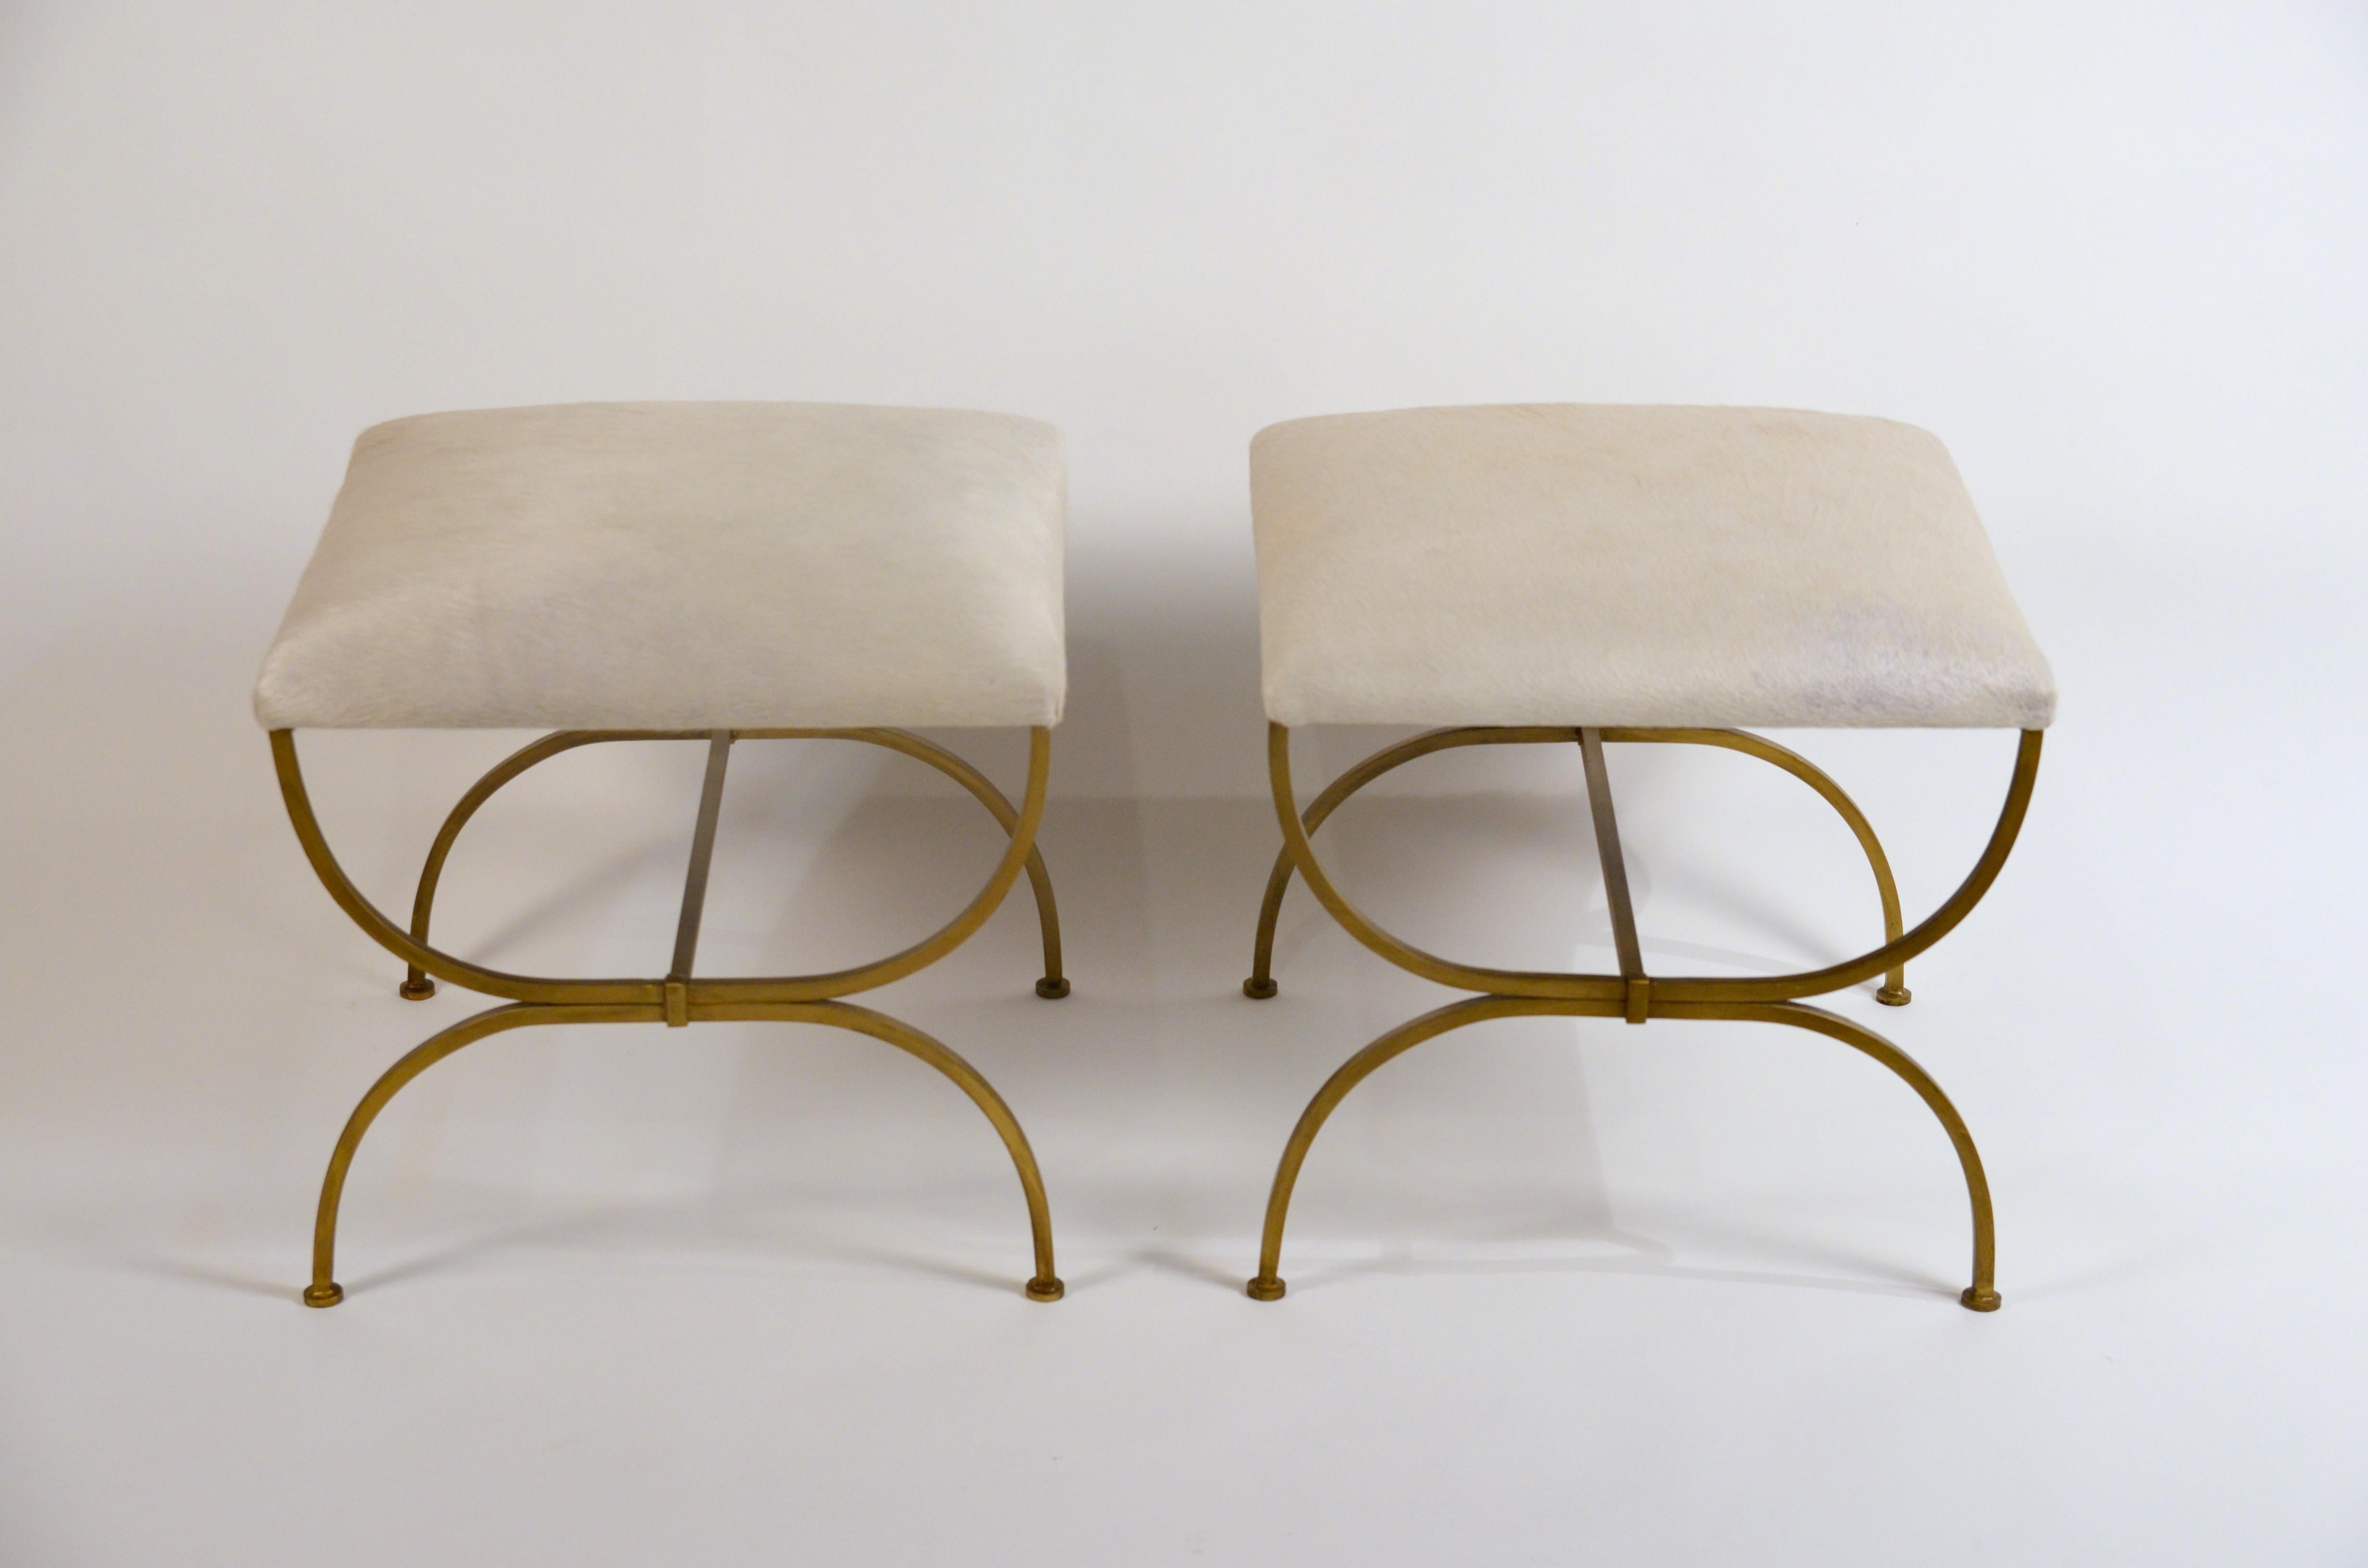 Pair of large 'Strapontin' white hides stools by design Frères. Gilt wrought iron bases and white or cream hide seats. Upholstered firm for durability.